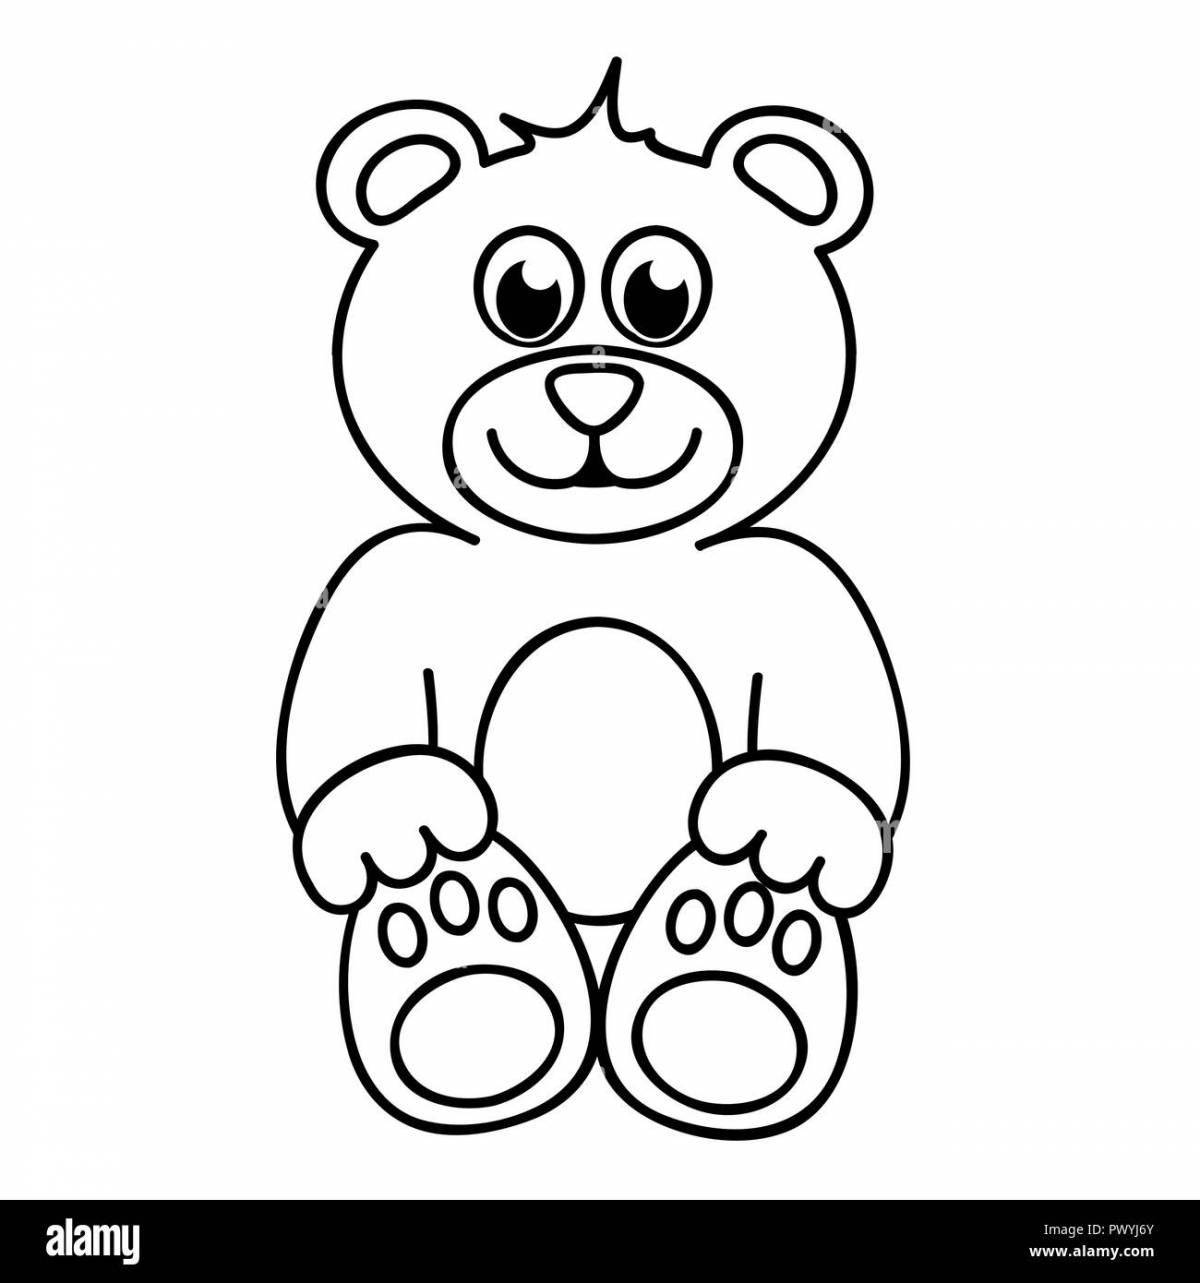 Coloring page happy teddy bear in baby pants